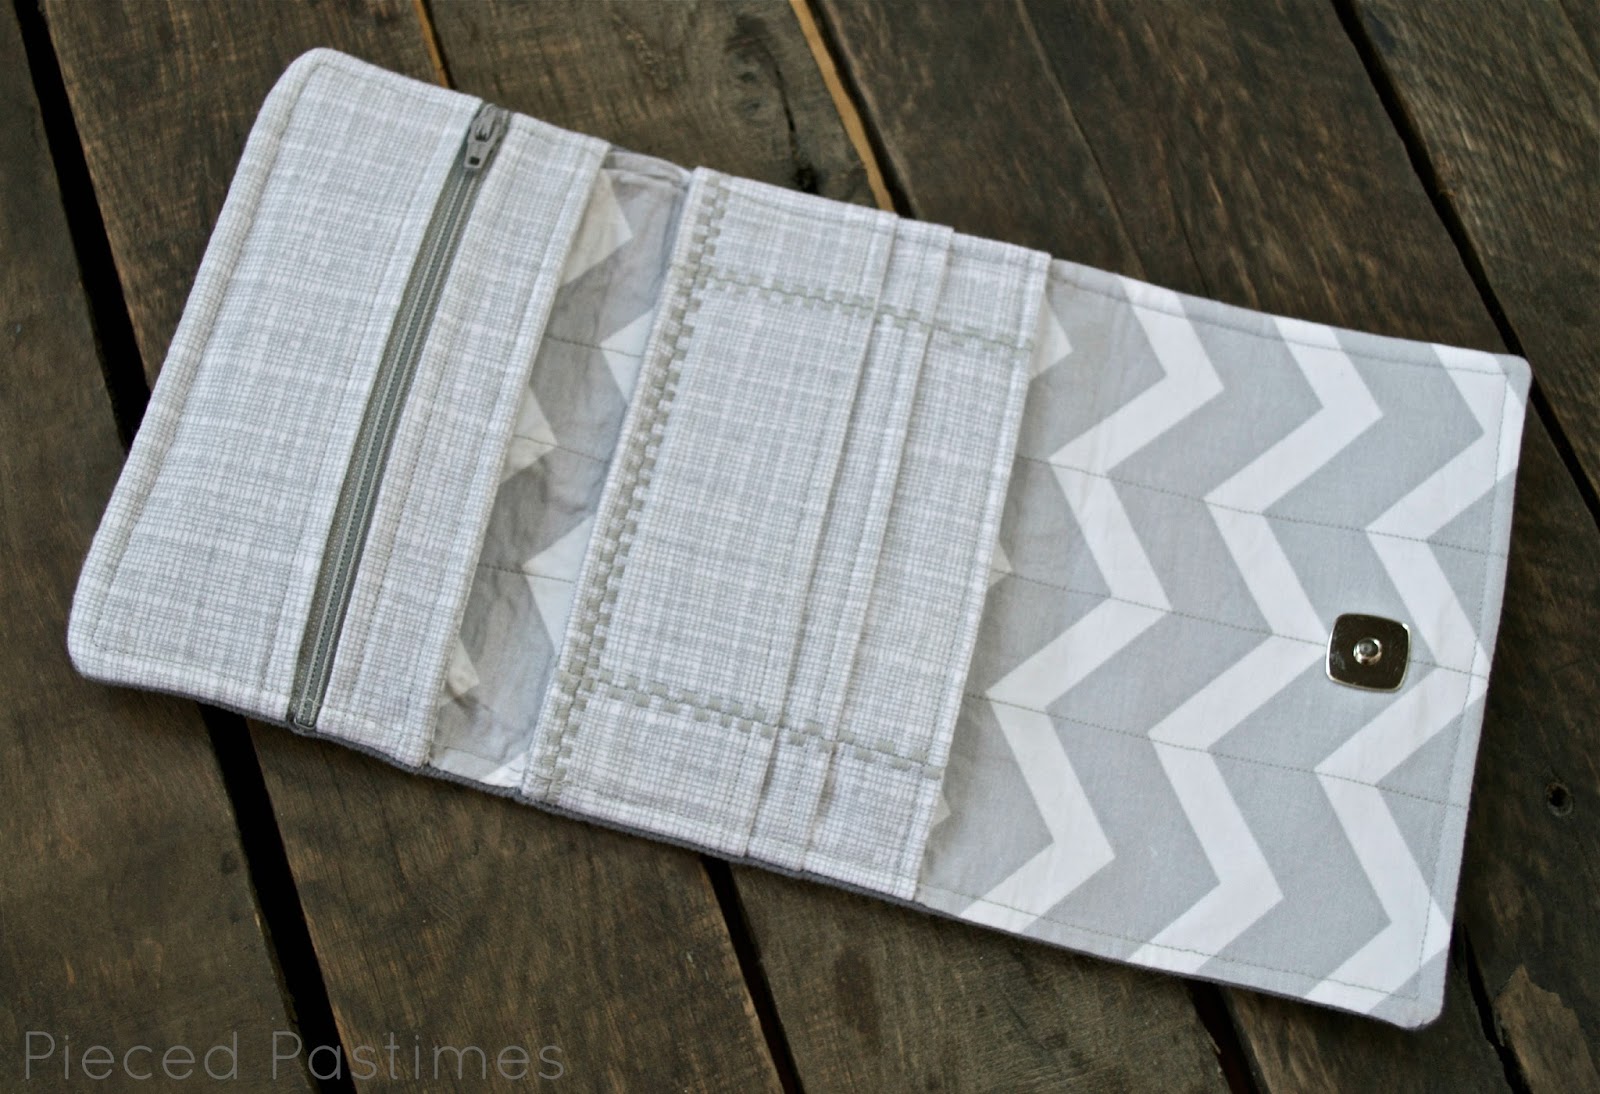 Pieced Pastimes: Cell Phone Wallet